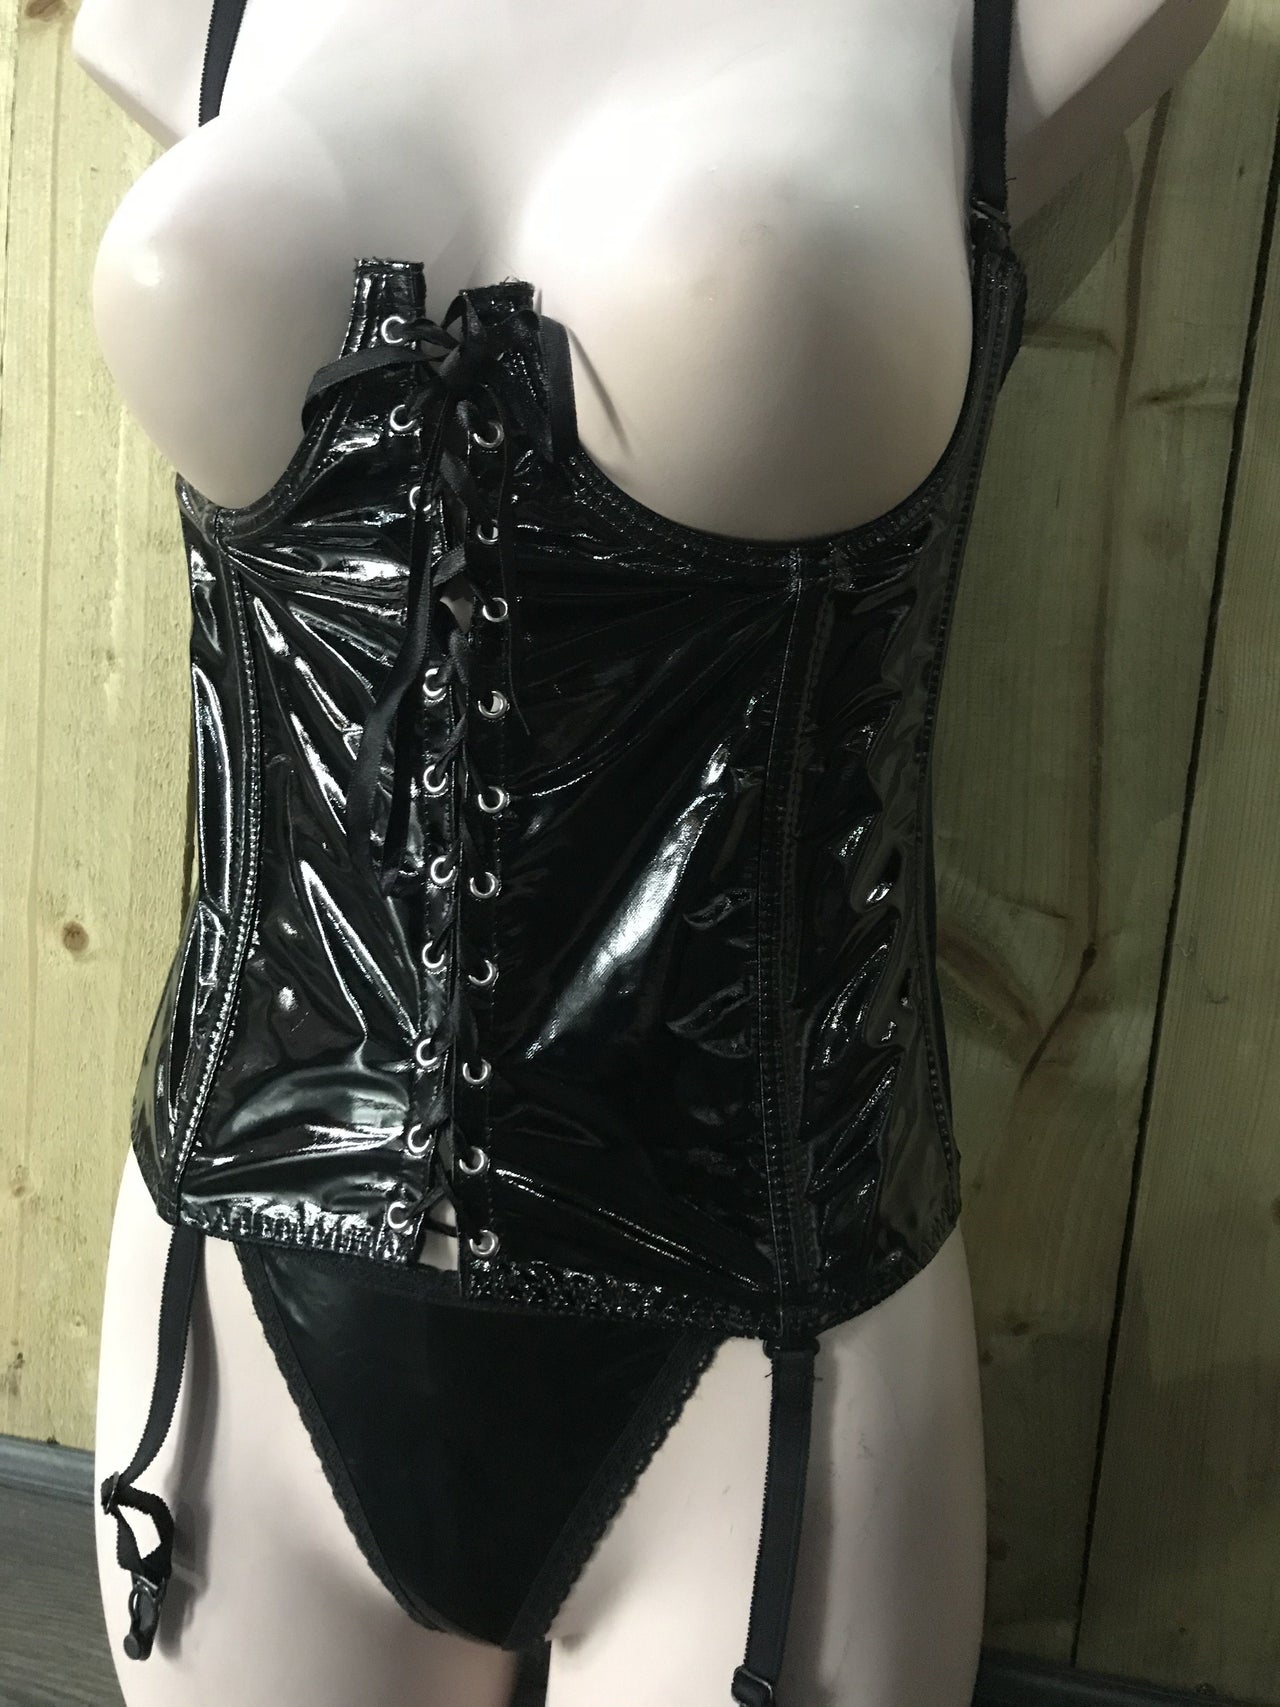 PVC Wetlook Open Cup Basque by Classified